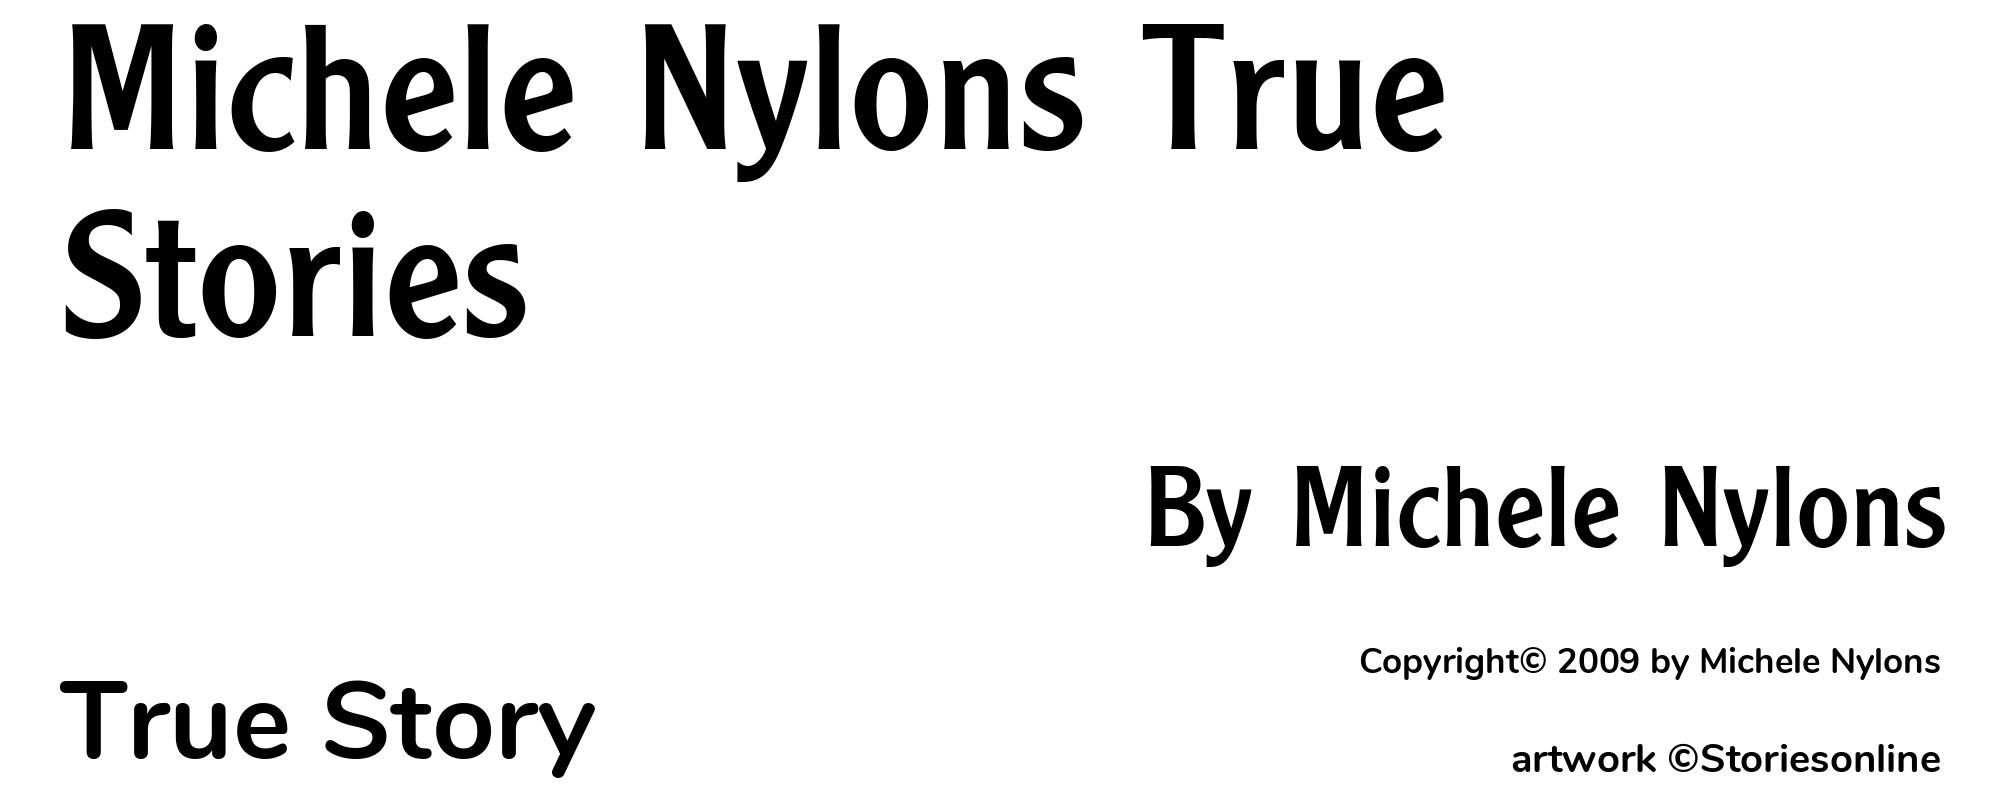 Michele Nylons True Stories - Cover